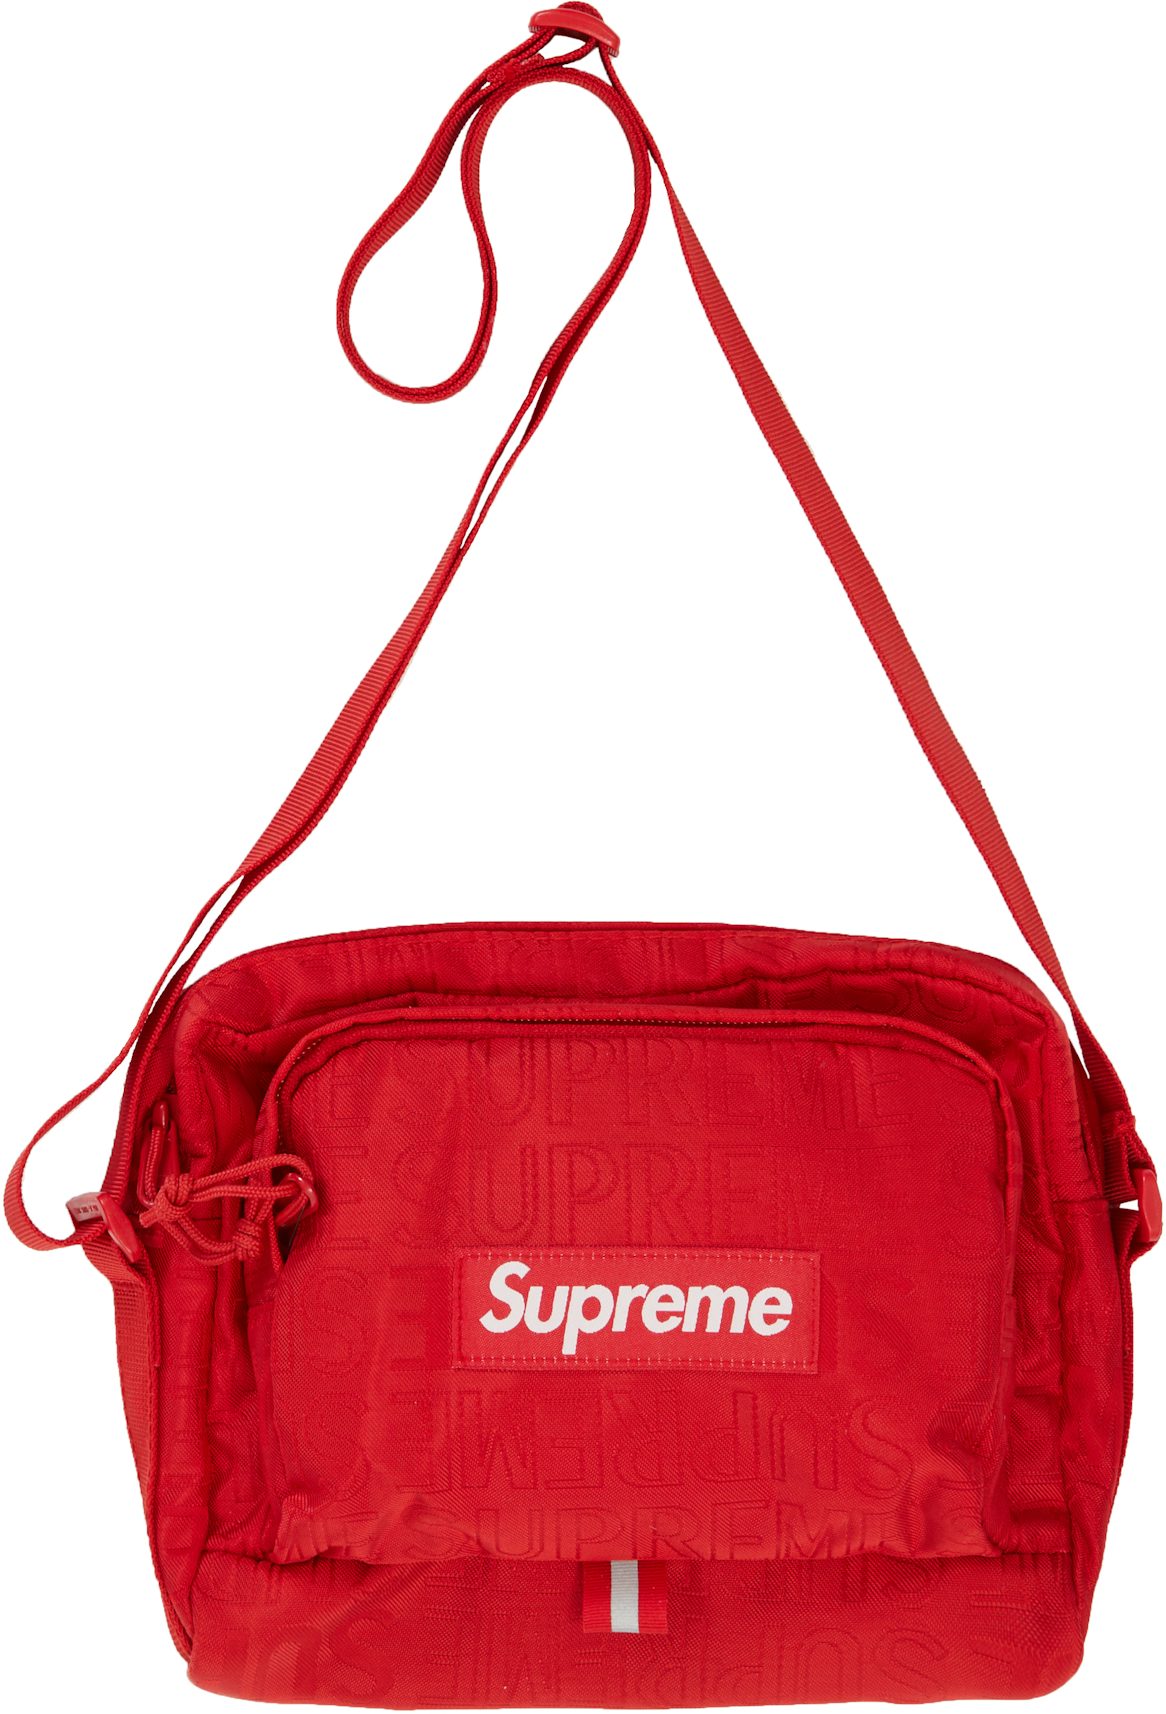 How to Tell If Supreme Shoulder Bag is Fake 